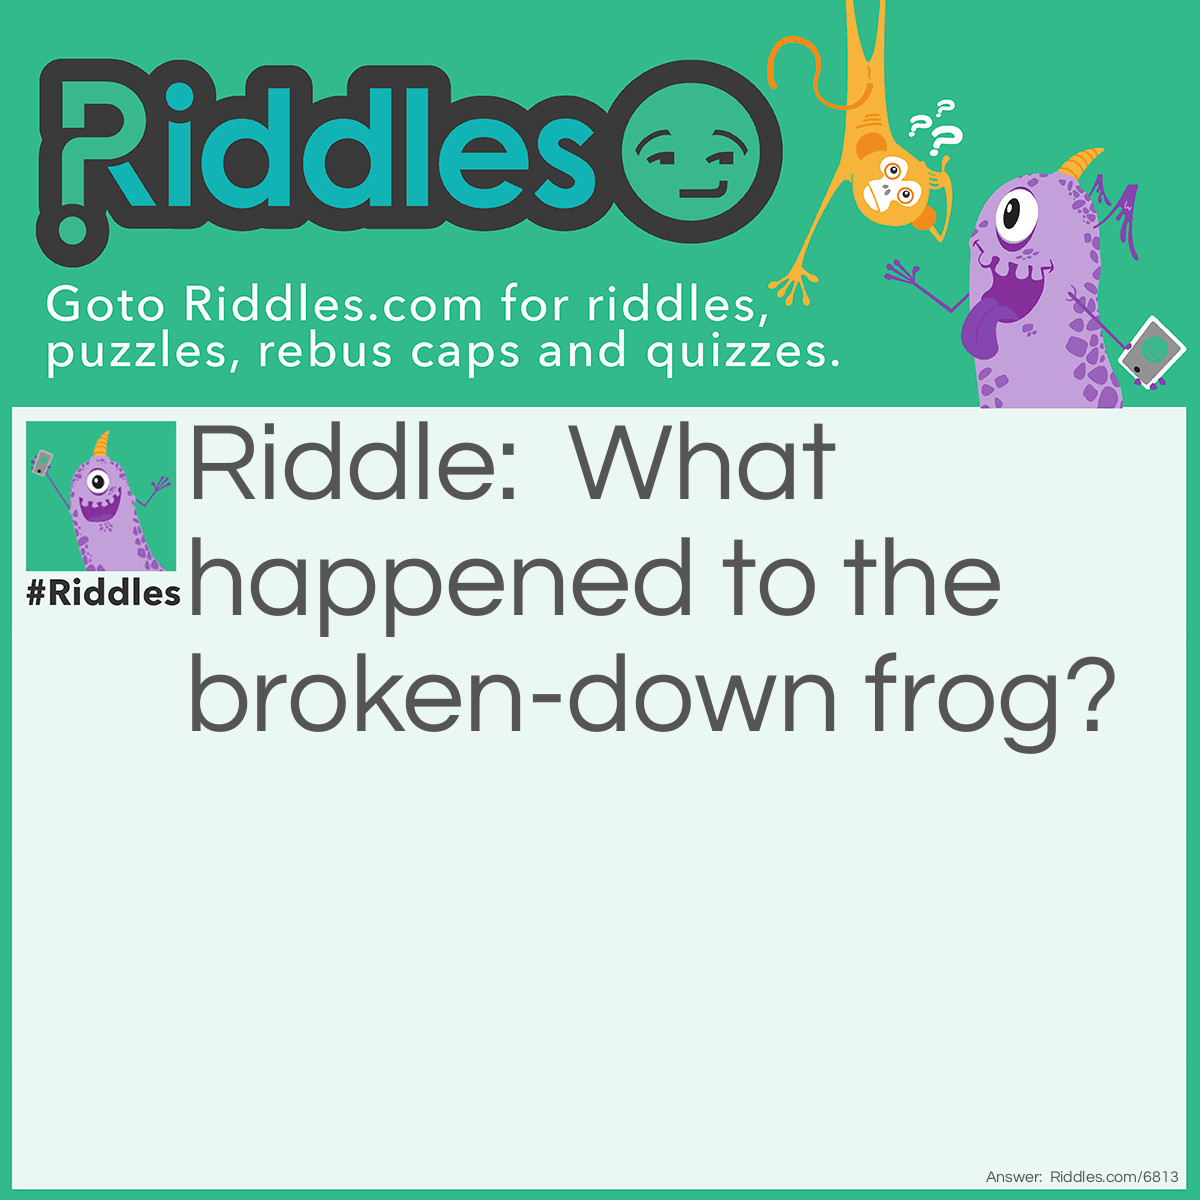 Riddle: What happened to the broken-down frog? Answer: It got toad (towed) away.